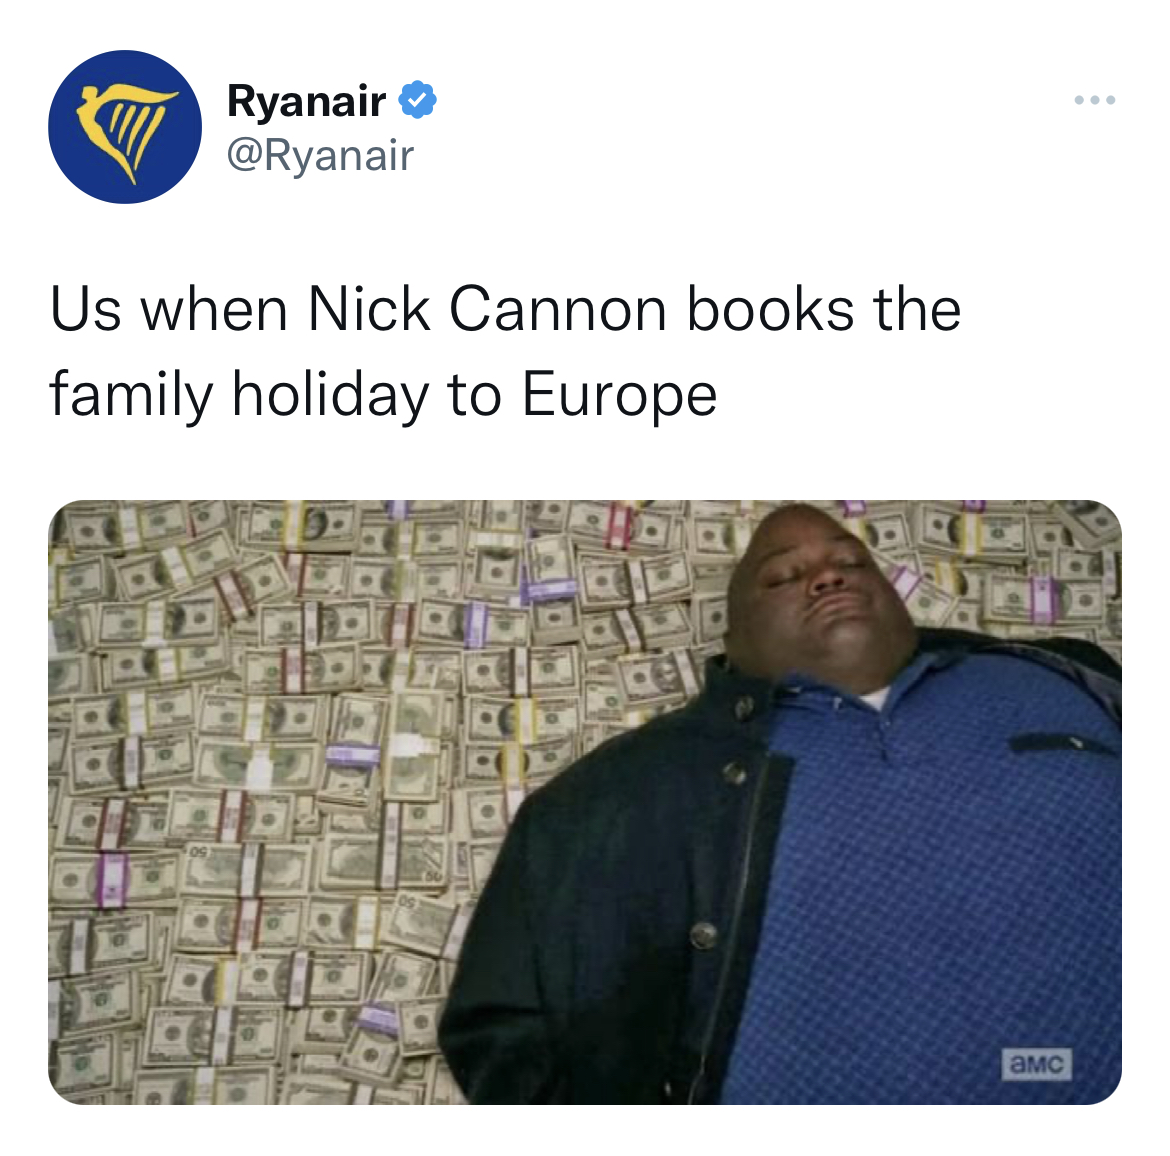 Tweets roasting celebs - rich memes - Ryanair Us when Nick Cannon books the family holiday to Europe